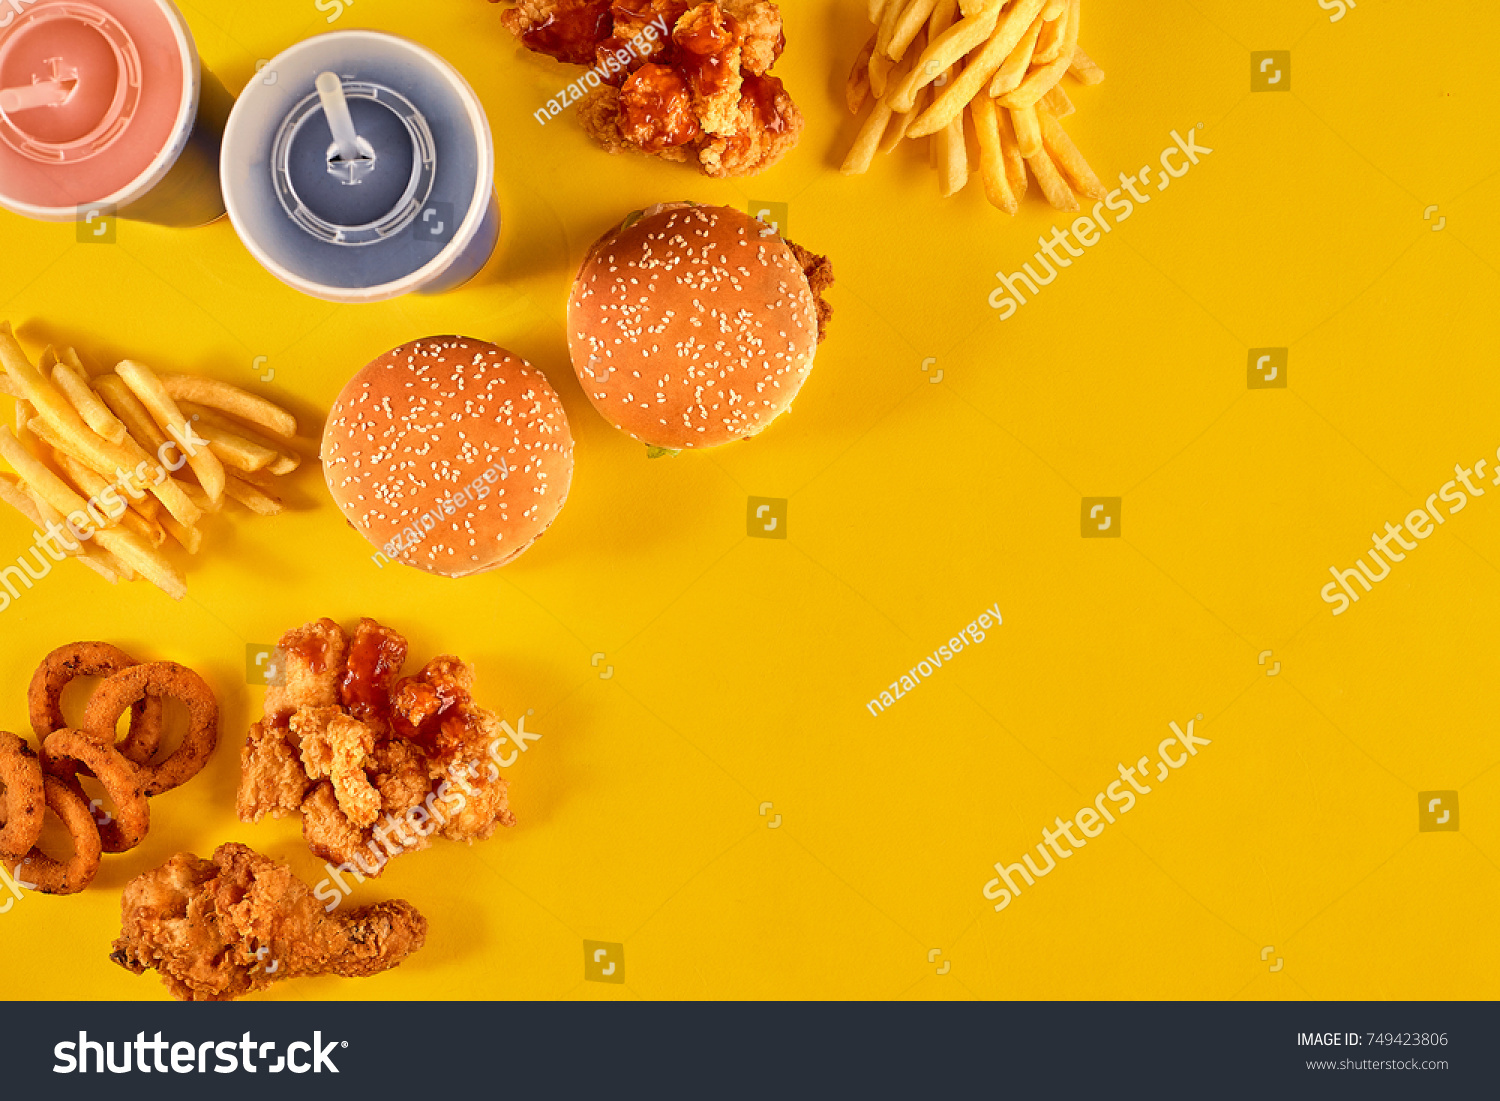 Fast food dish on yellow background. Fast food set fried chicken, meat burger and french fries. Take away fast food. #749423806